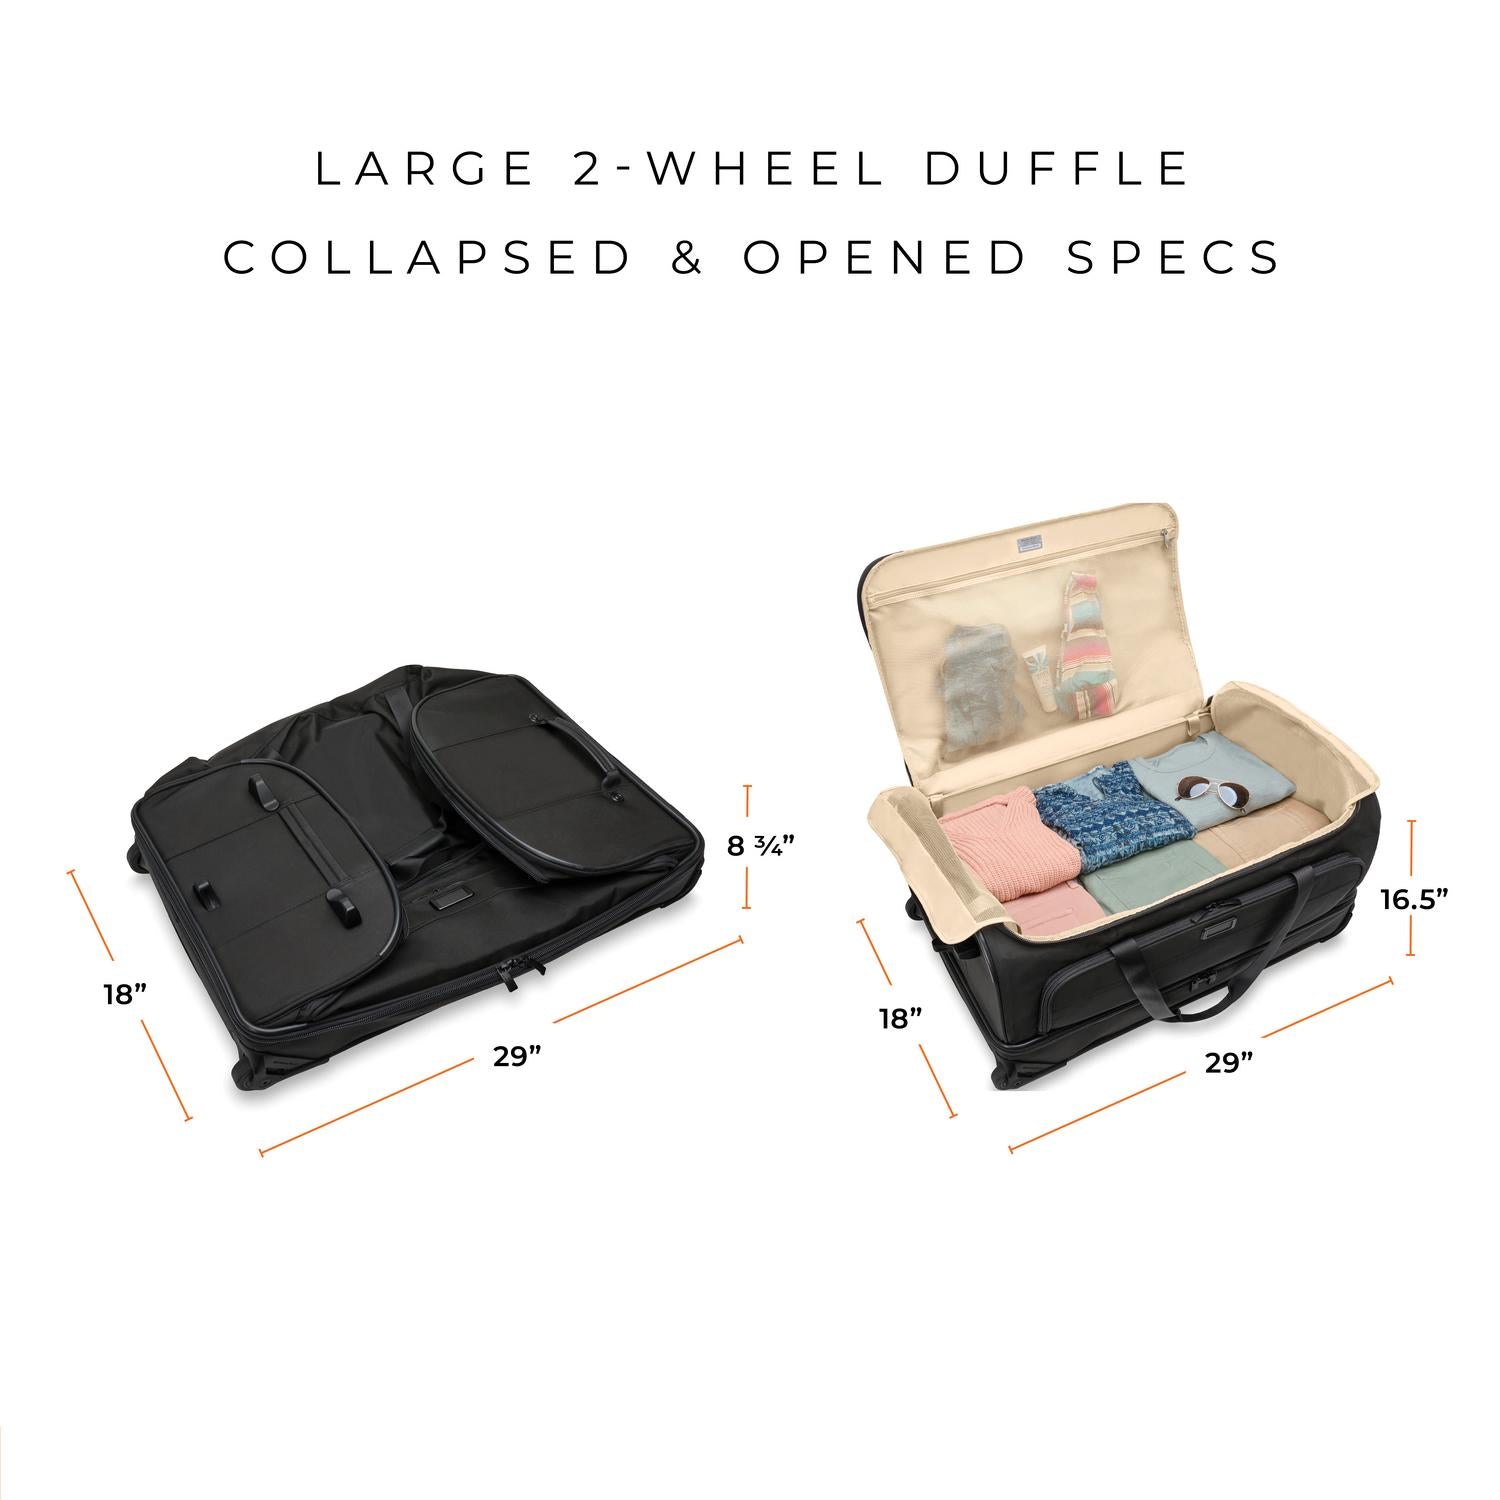 Briggs and Riley Large Two-Wheel Duffle Collapsed and Open Specs, 18"x29"x8 3/4", 18"x29"x16.5" #color_black